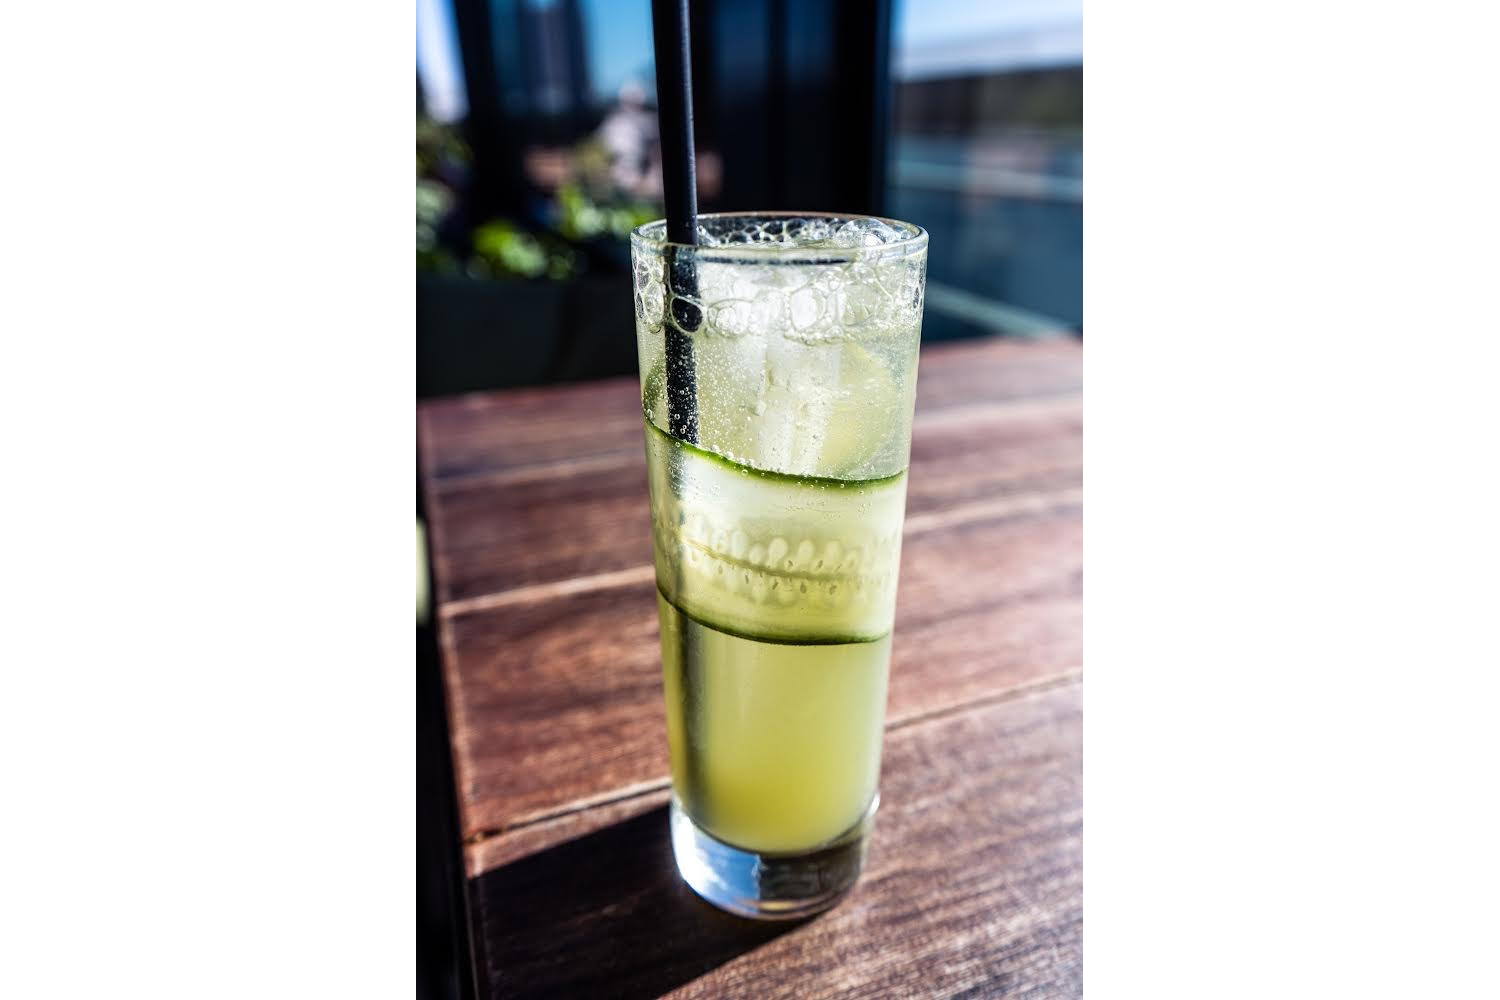 Boro the Caterpillar mocktail at Kaiyo Rooftop and Cow Hollow